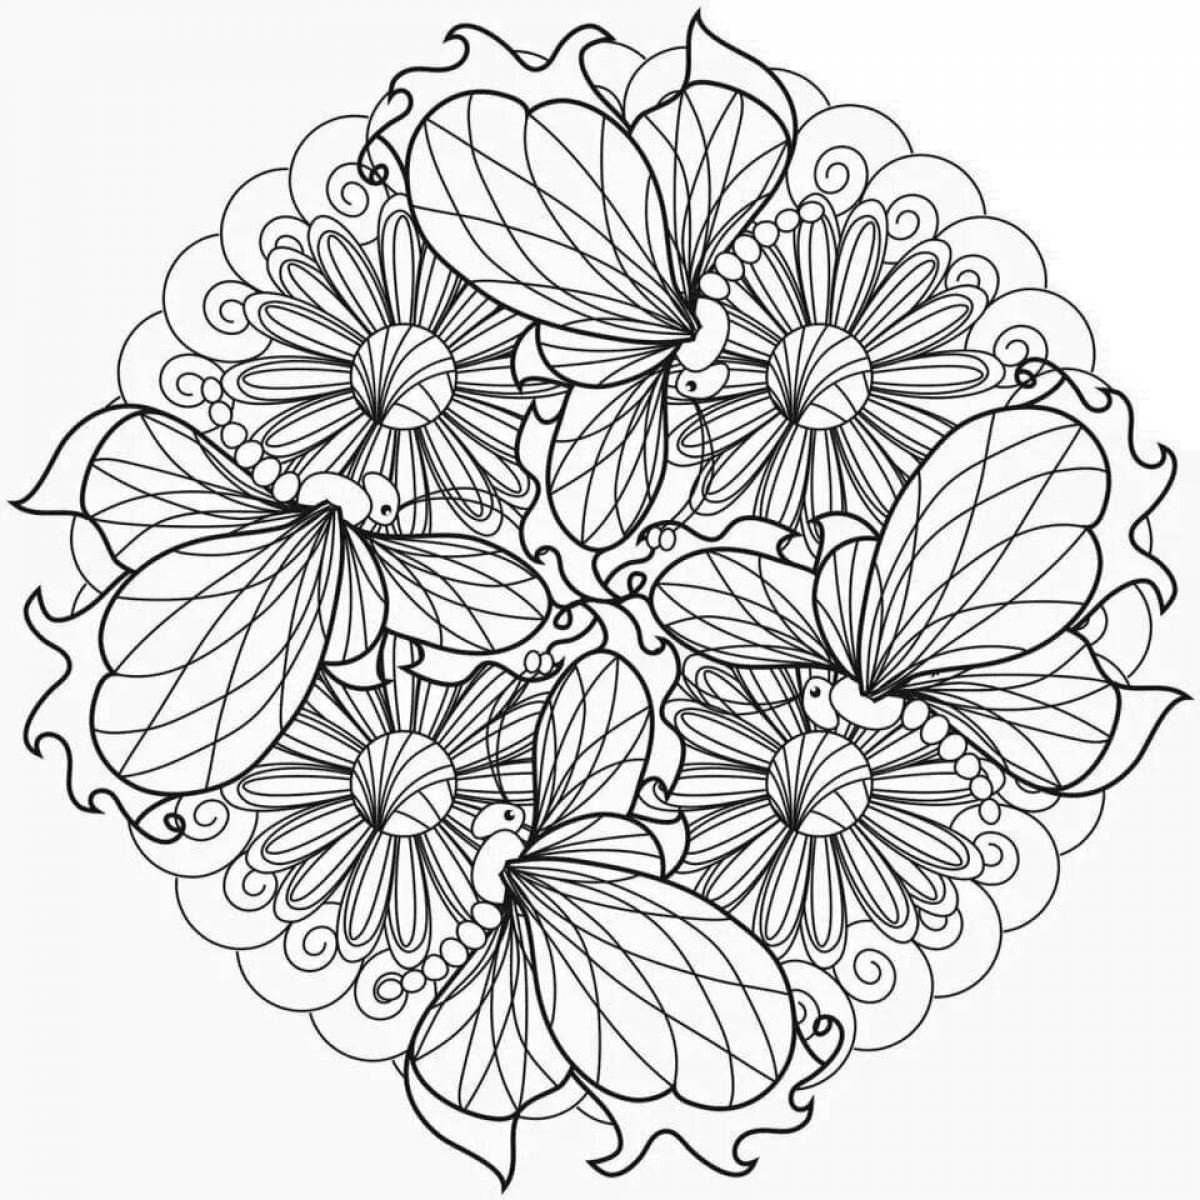 Attractive intricate flower coloring book